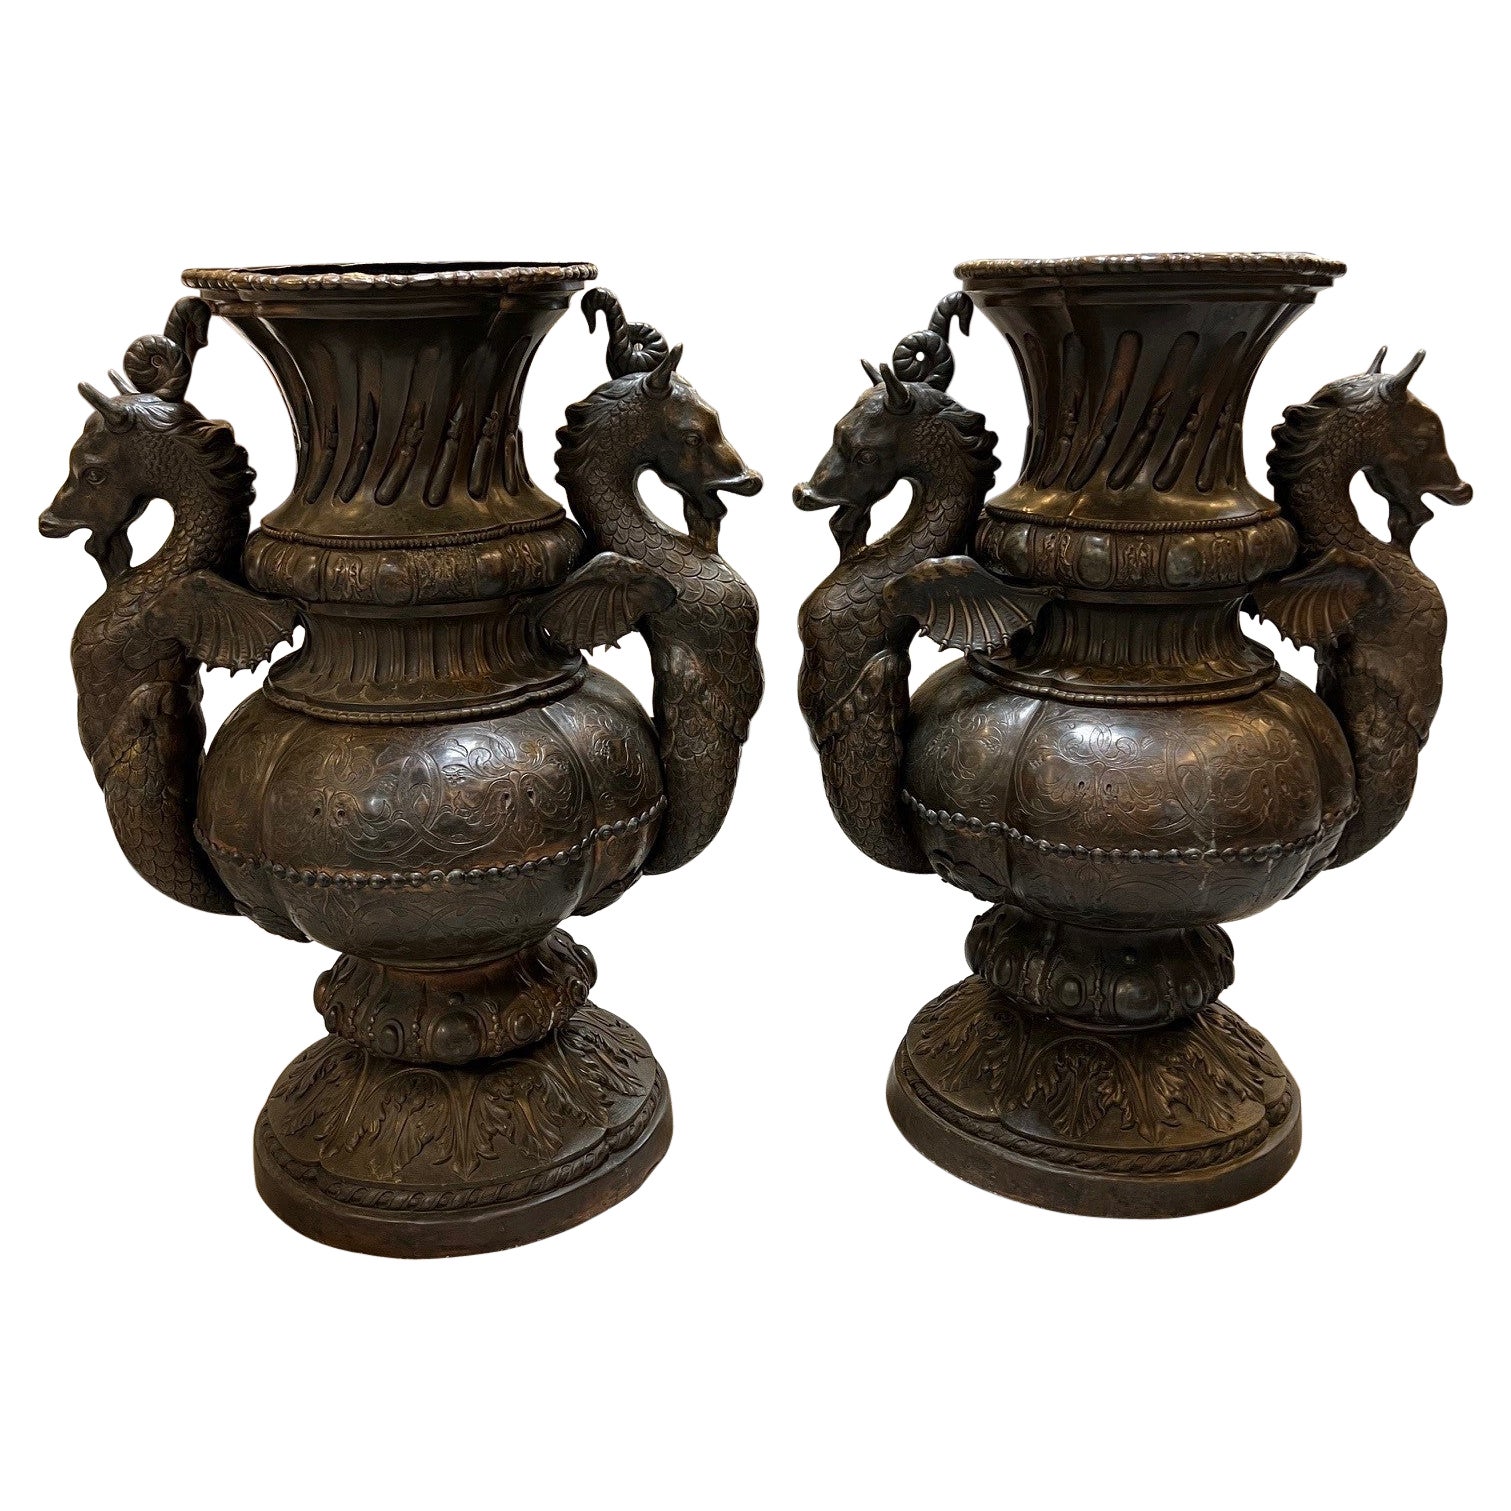 Pair of Antique Handcrafted Copper Urns with Mythological Seahorse Handles   For Sale